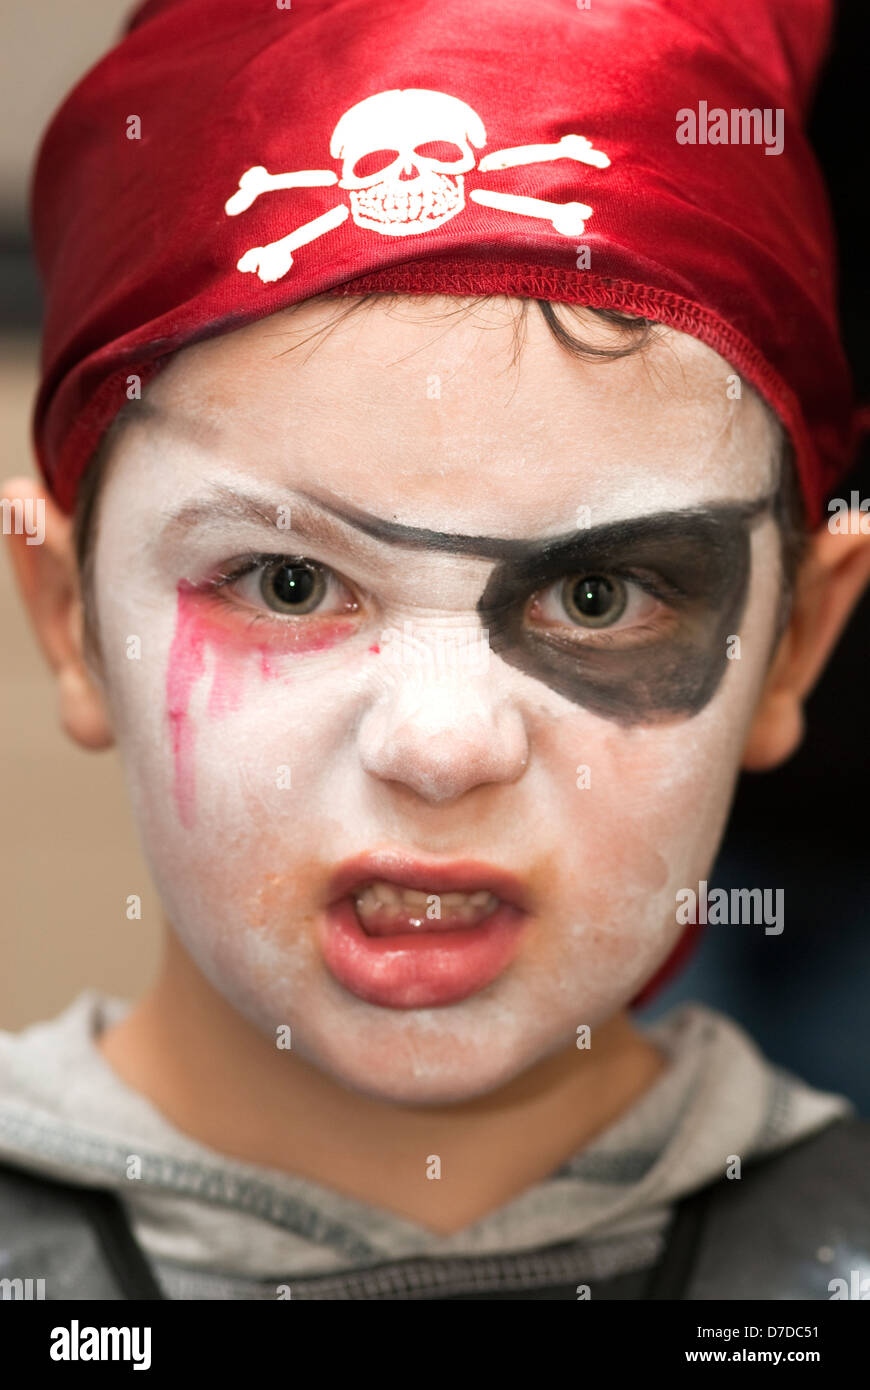 pirate face painting